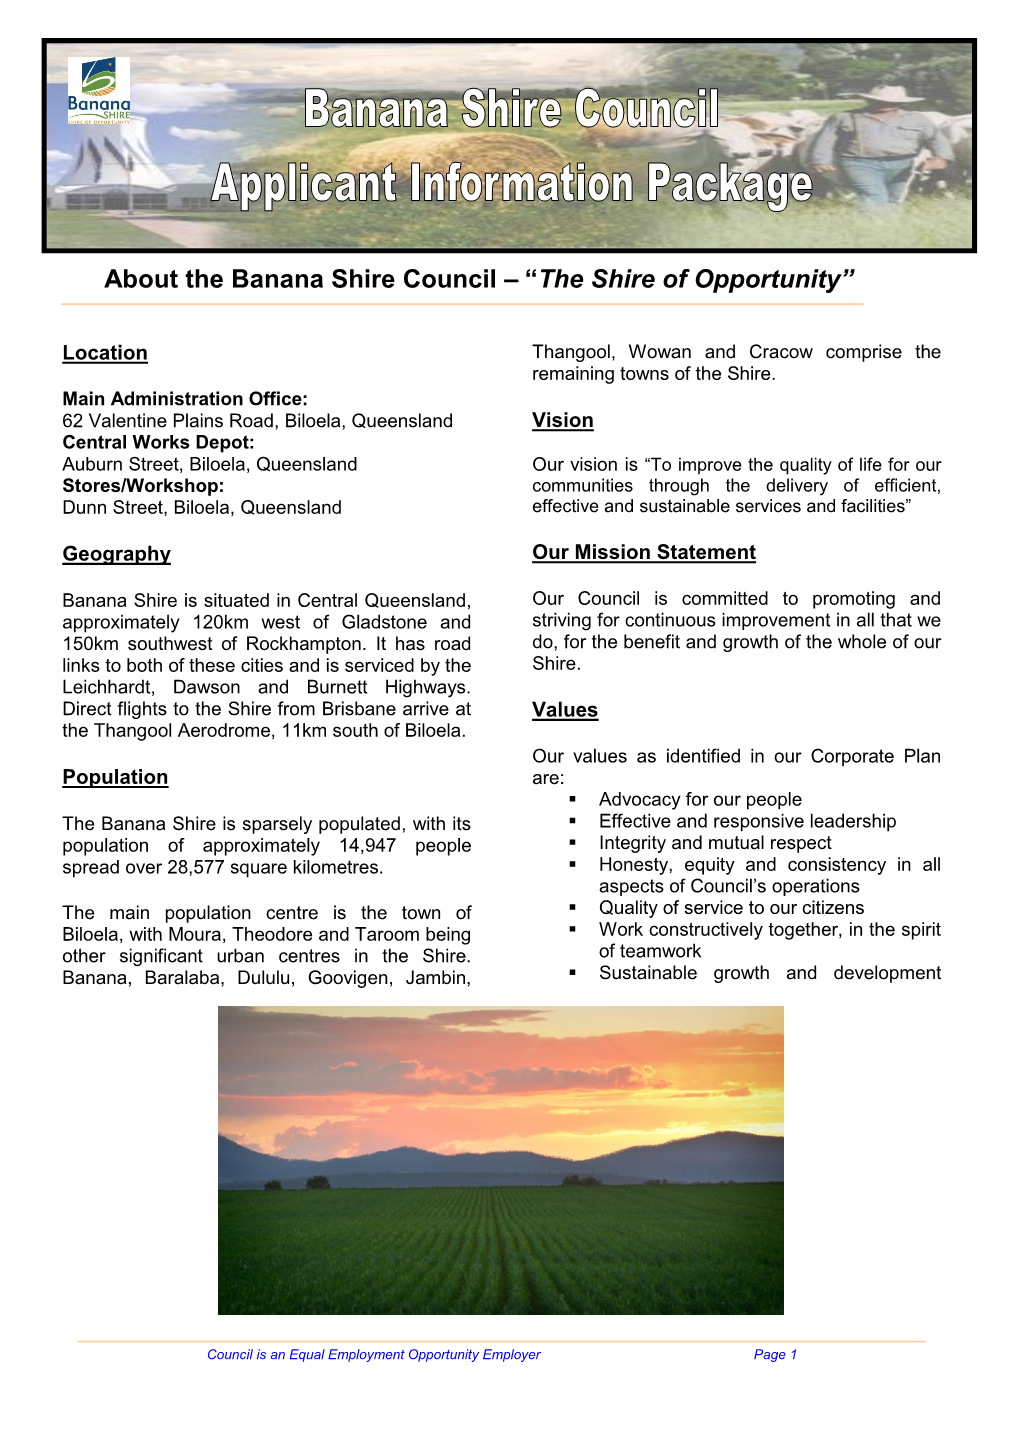 About the Banana Shire Council – “The Shire of Opportunity”